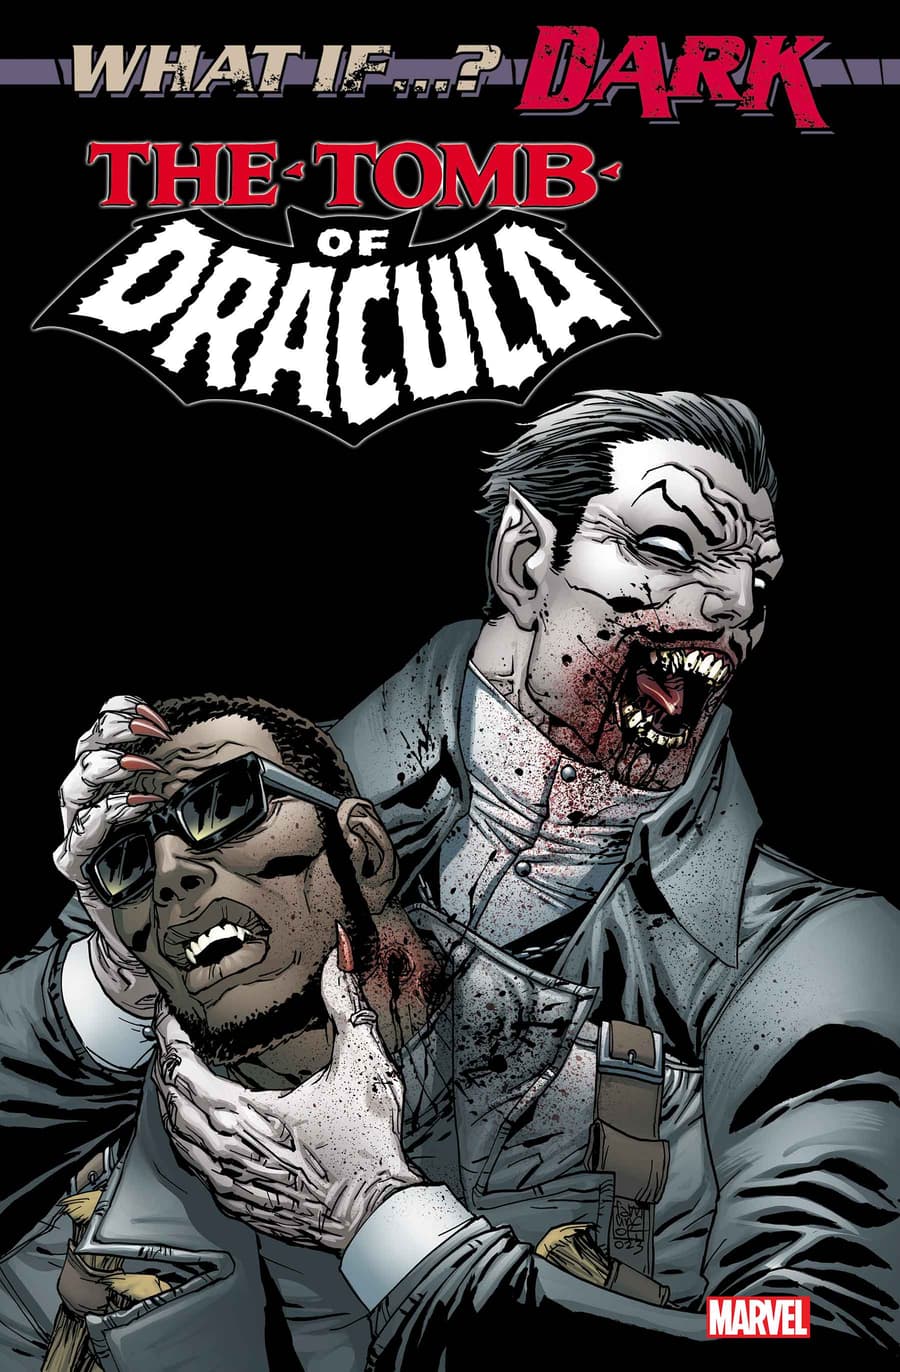 WHAT IF...? DARK: TOMB OF DRACULA #1 cover by Giuseppe Camuncoli